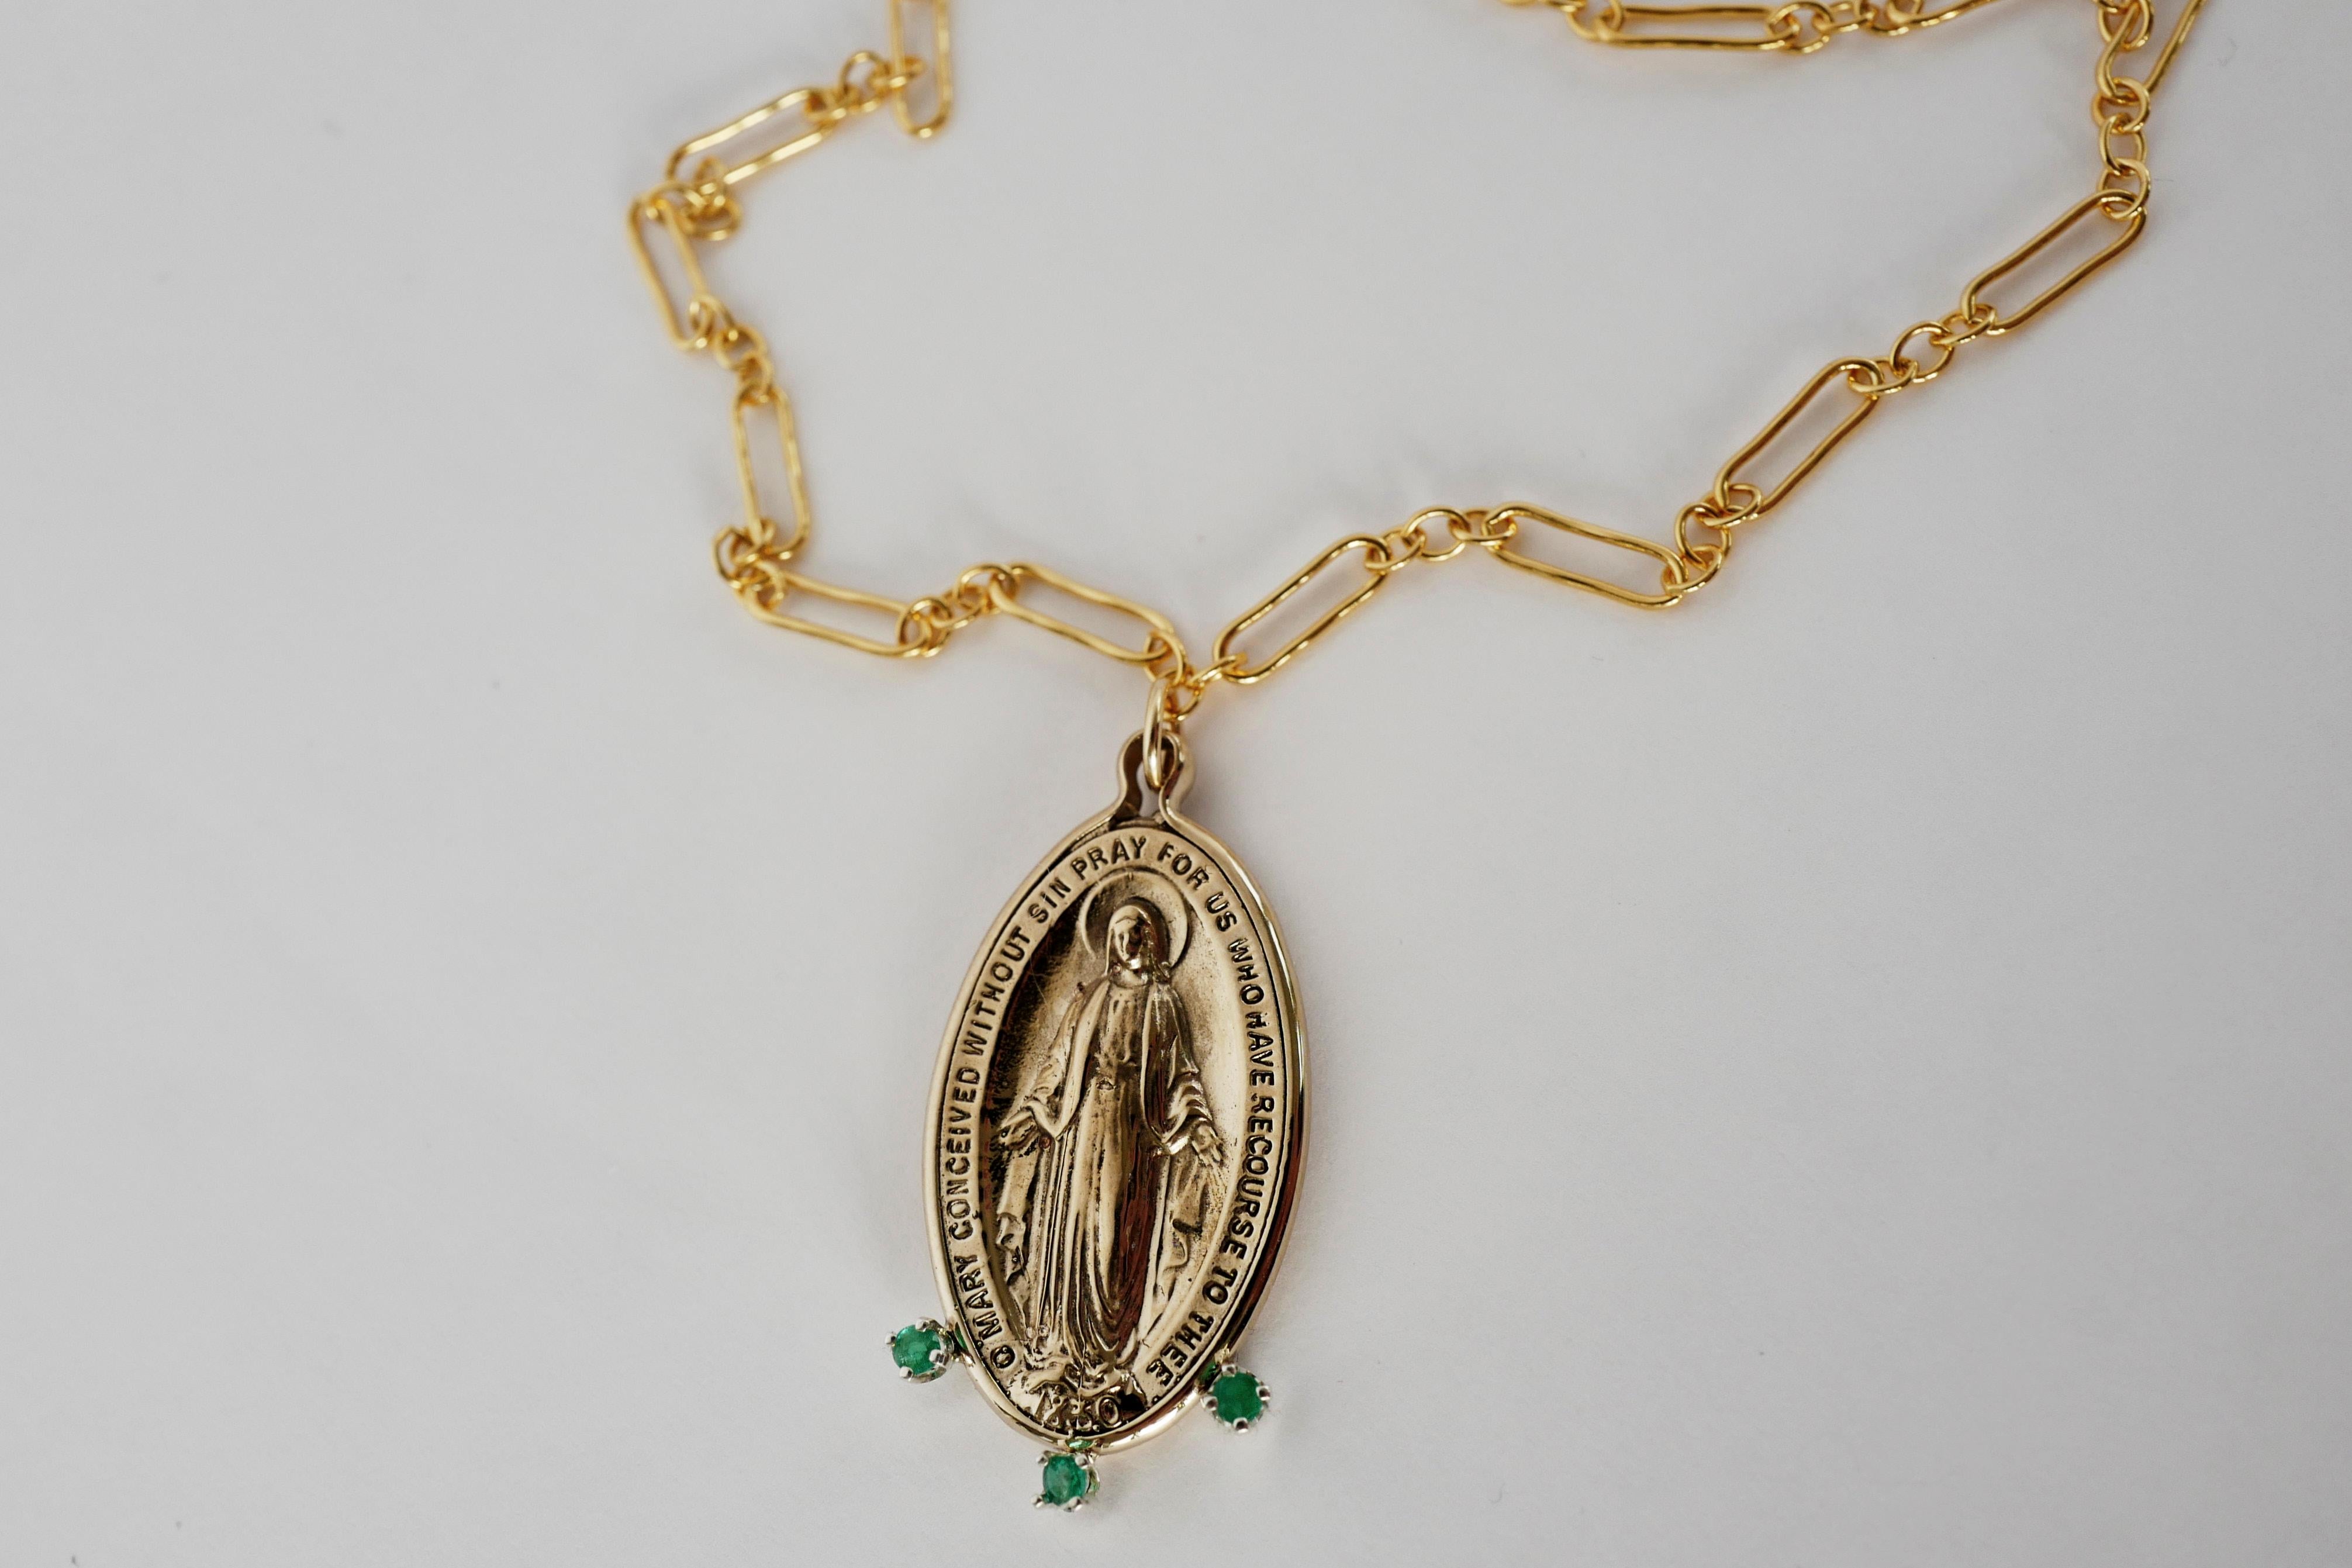 Emerald Virgin Mary Medal Pendant Chain Necklace J Dauphin In New Condition For Sale In Los Angeles, CA